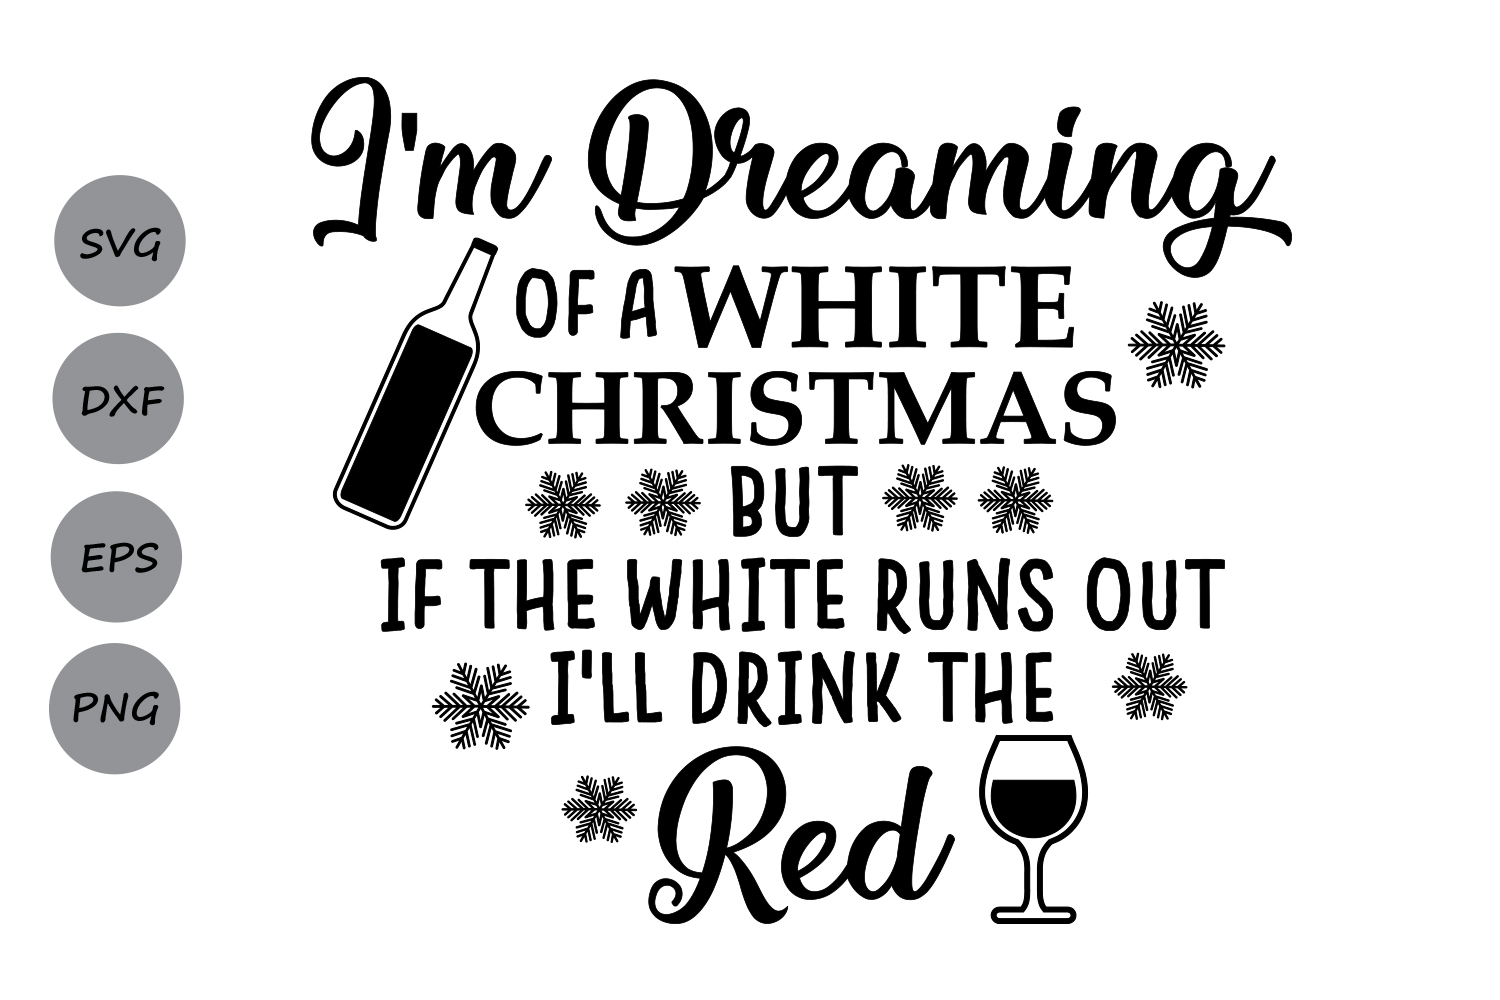 I'm dreaming of a white Christmas wine SVG, Christmas SVG, Wine SVG